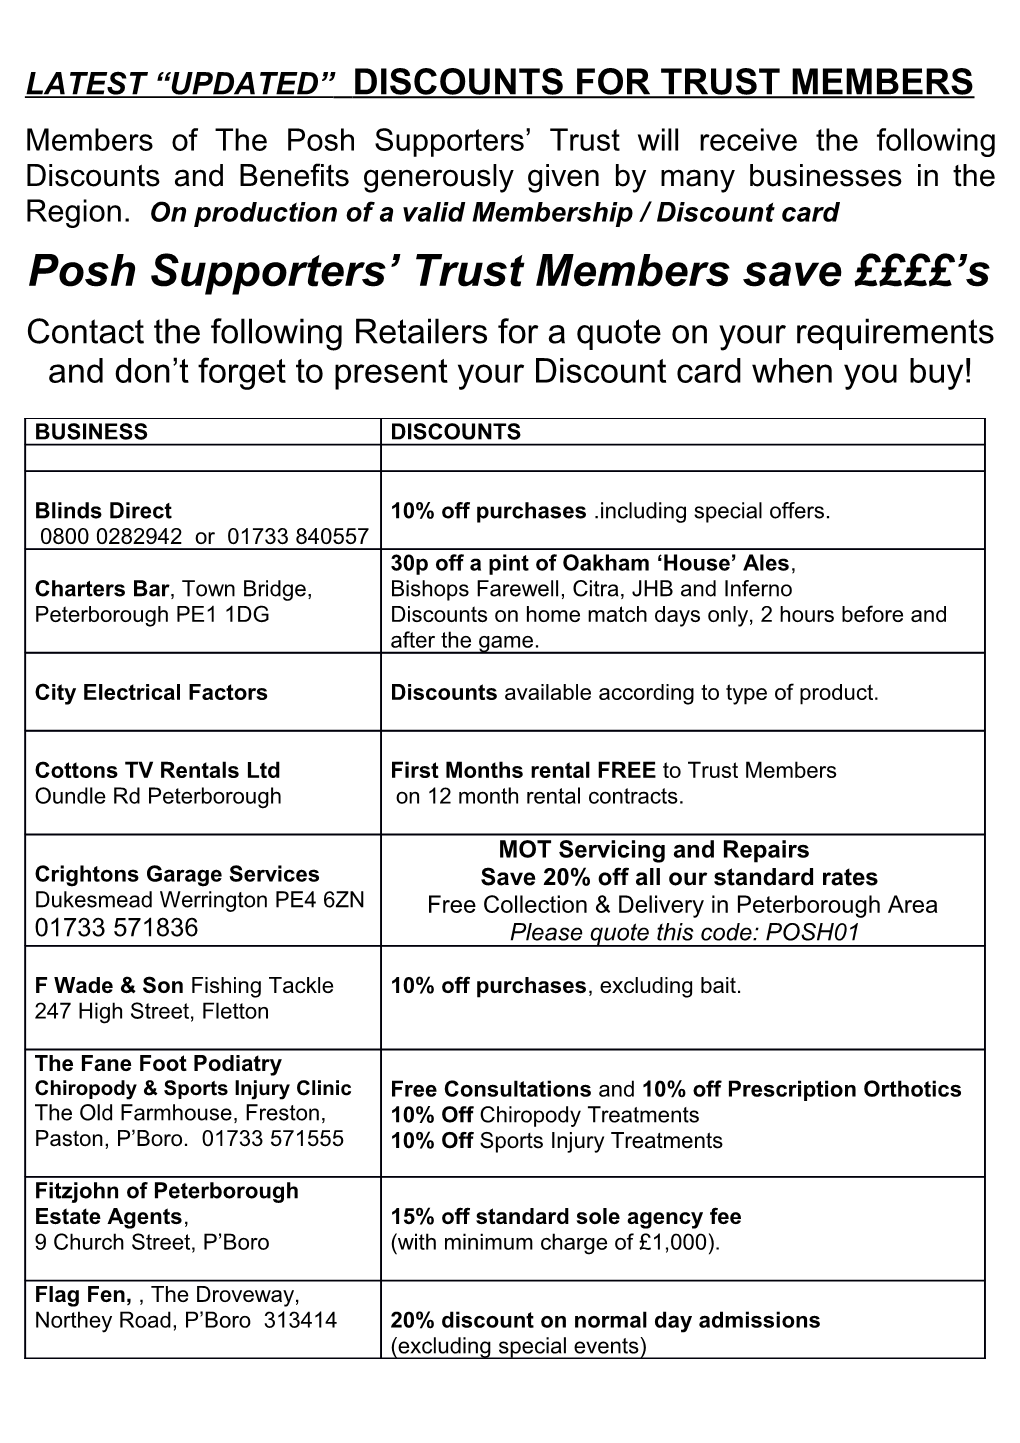 Latest Updated Discounts for Trust Members